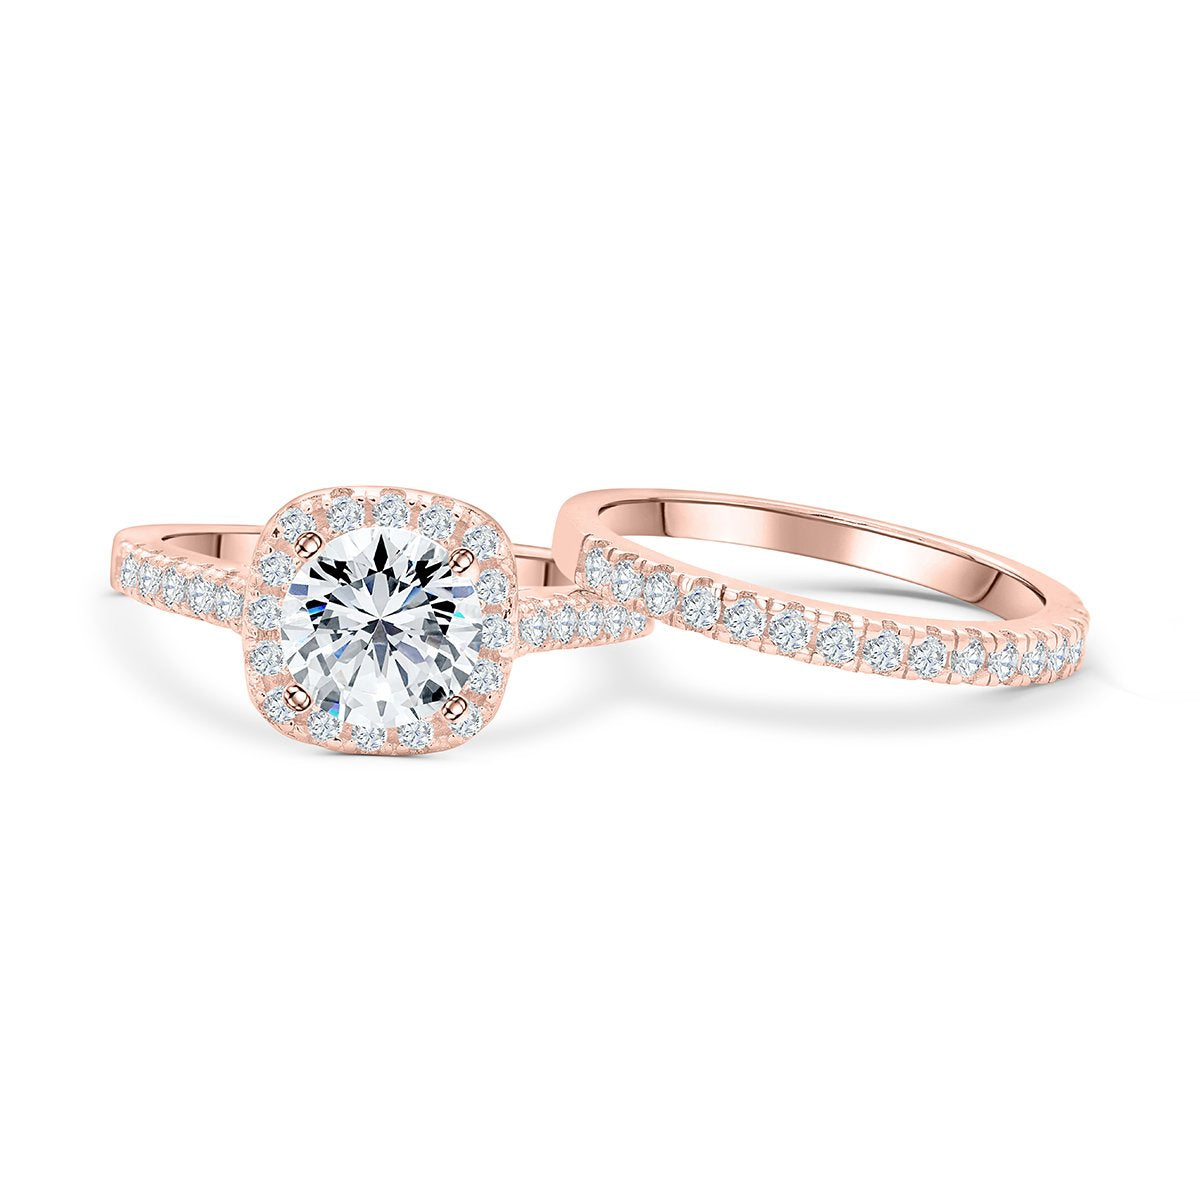 the evermore rose gold halo wedding set show separate